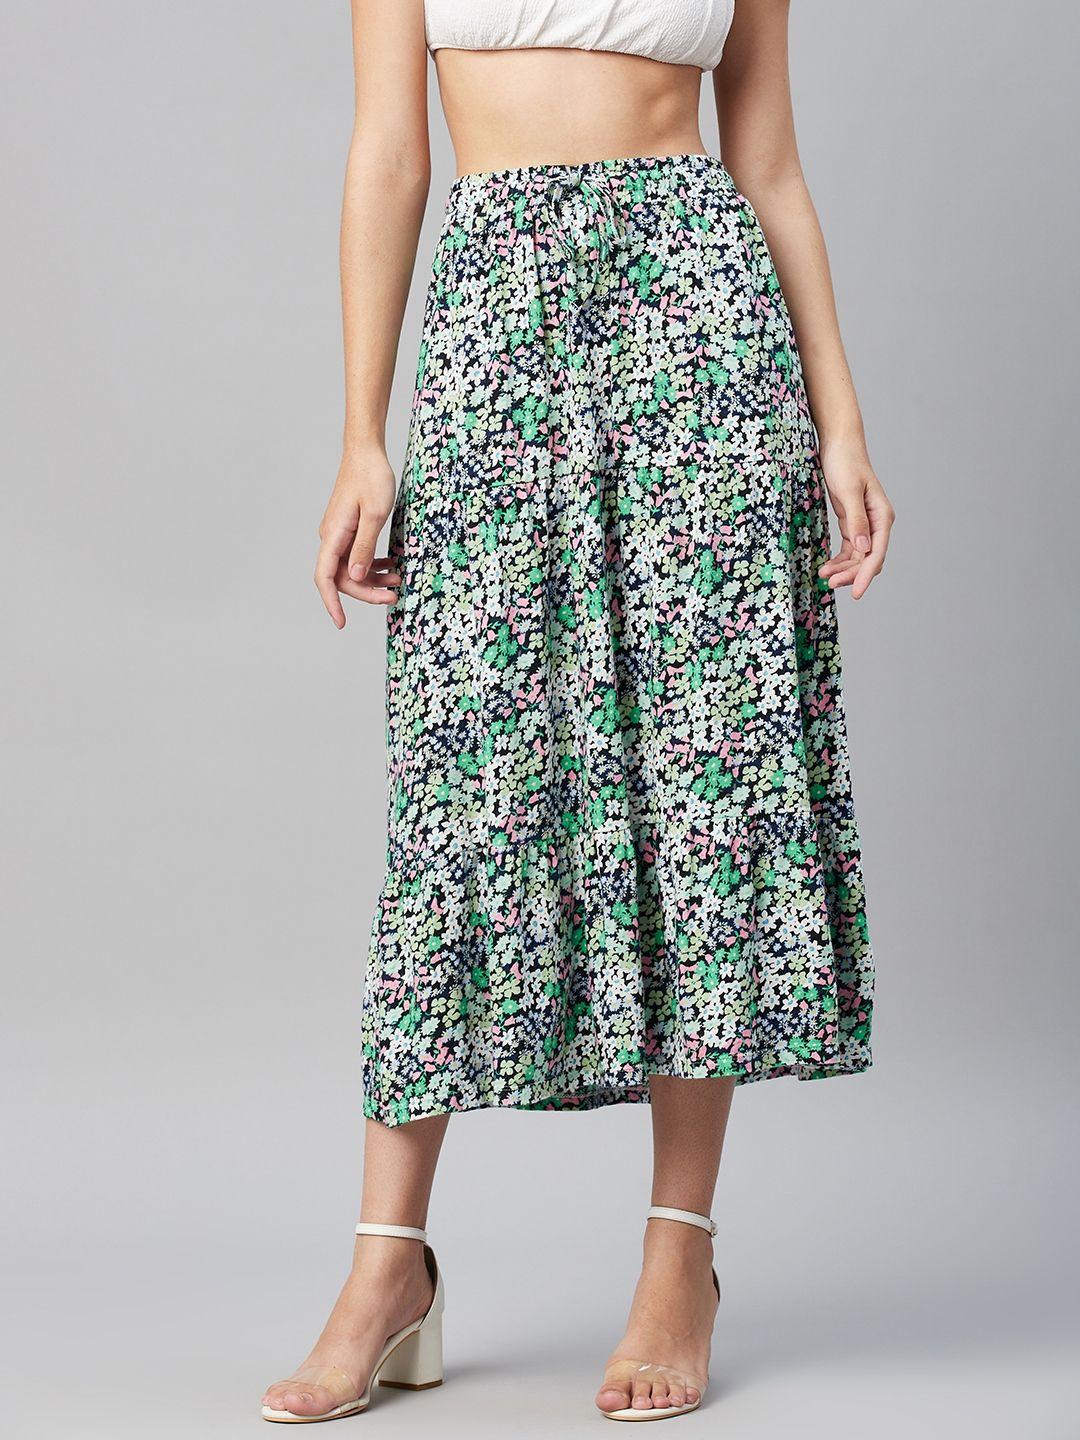 marks & spencer women white & green floral print a-line midi pure cotton skirt